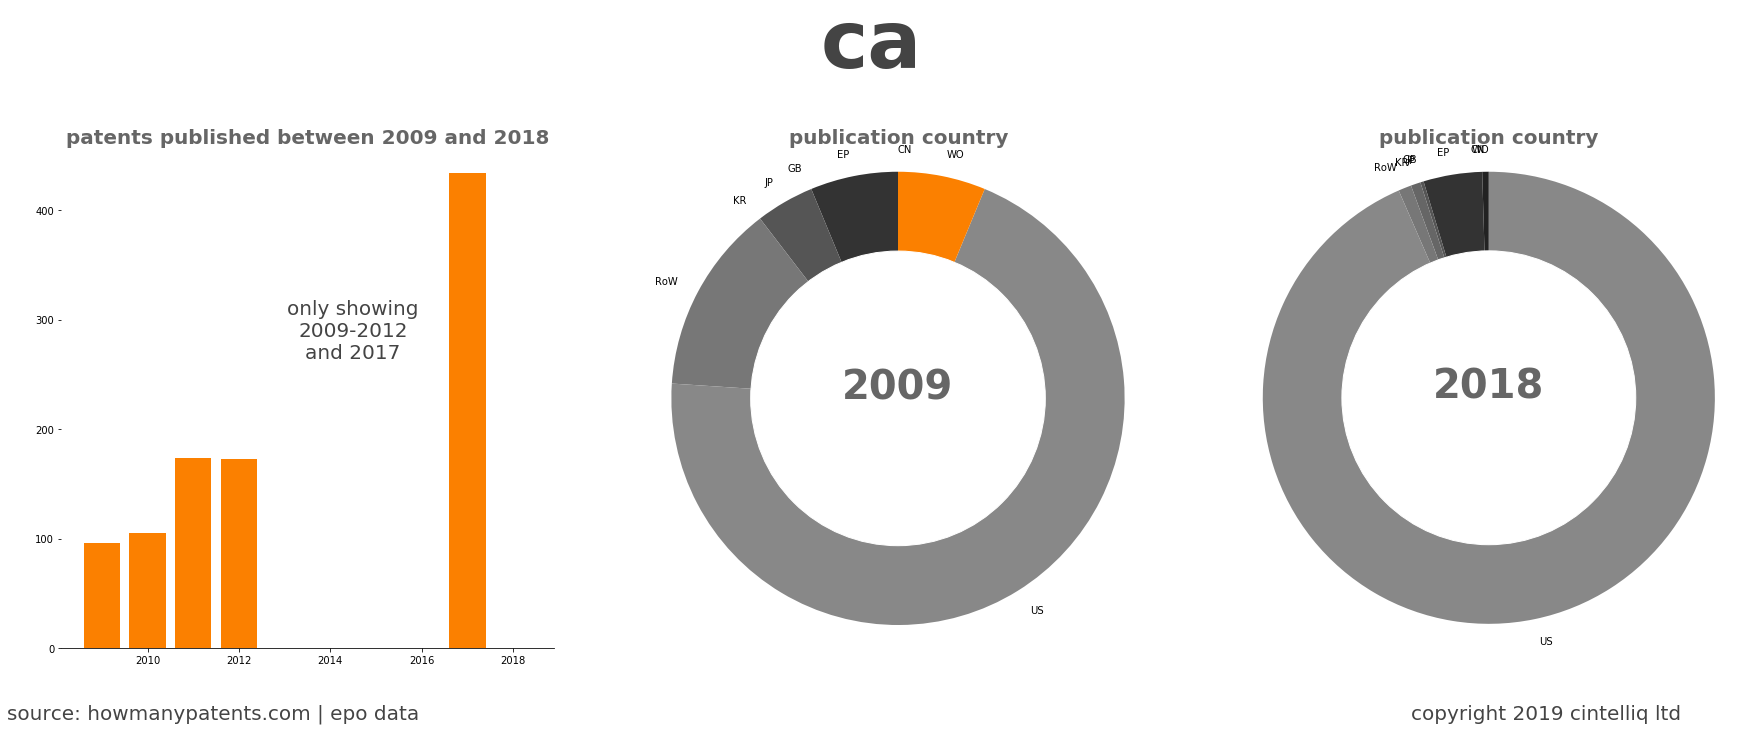 summary of patents for Ca